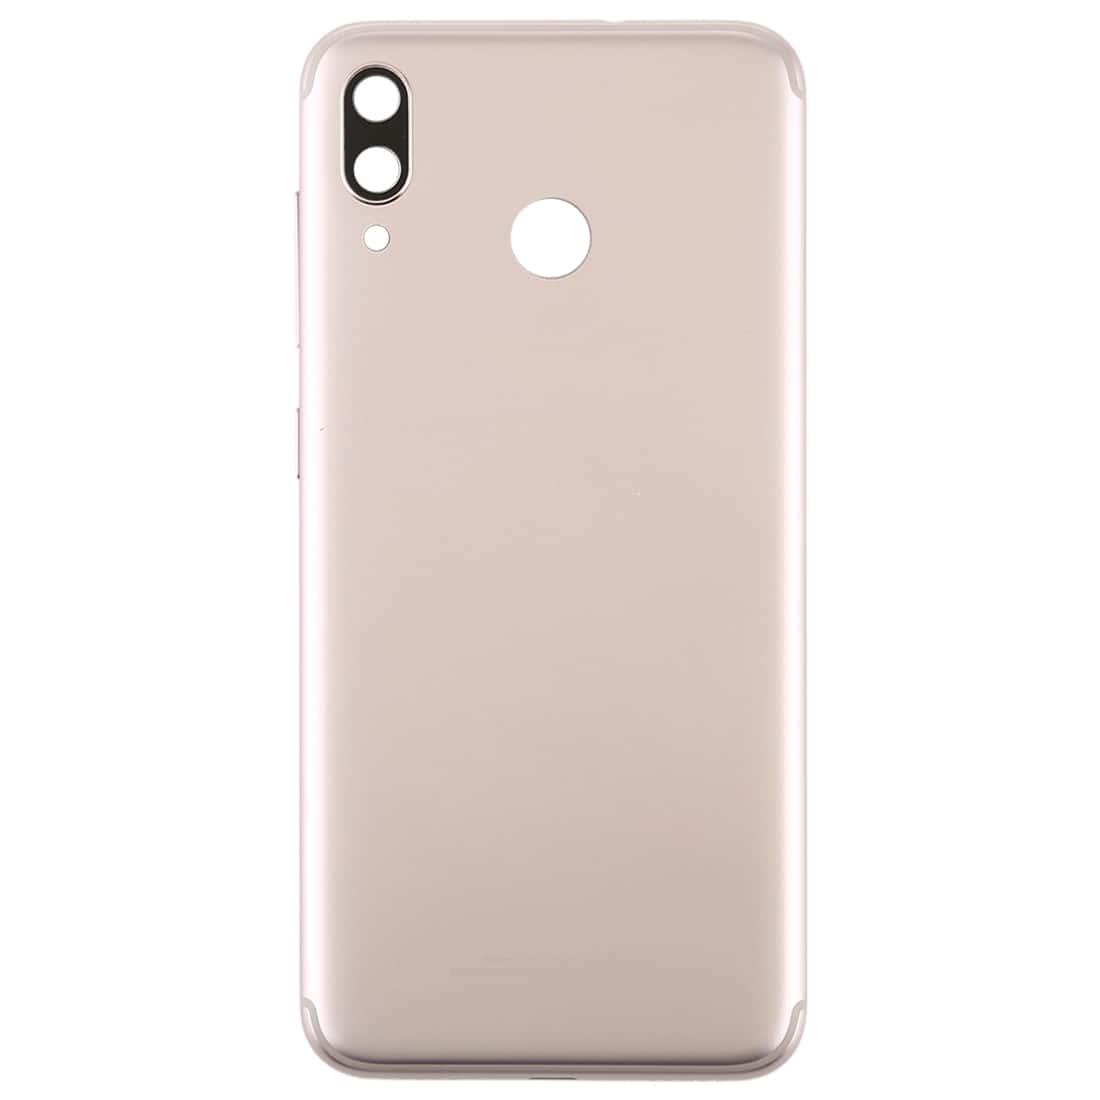 Back Panel Housing Body for Asus Zenfone Max M1 Rose Gold with Camera Lens